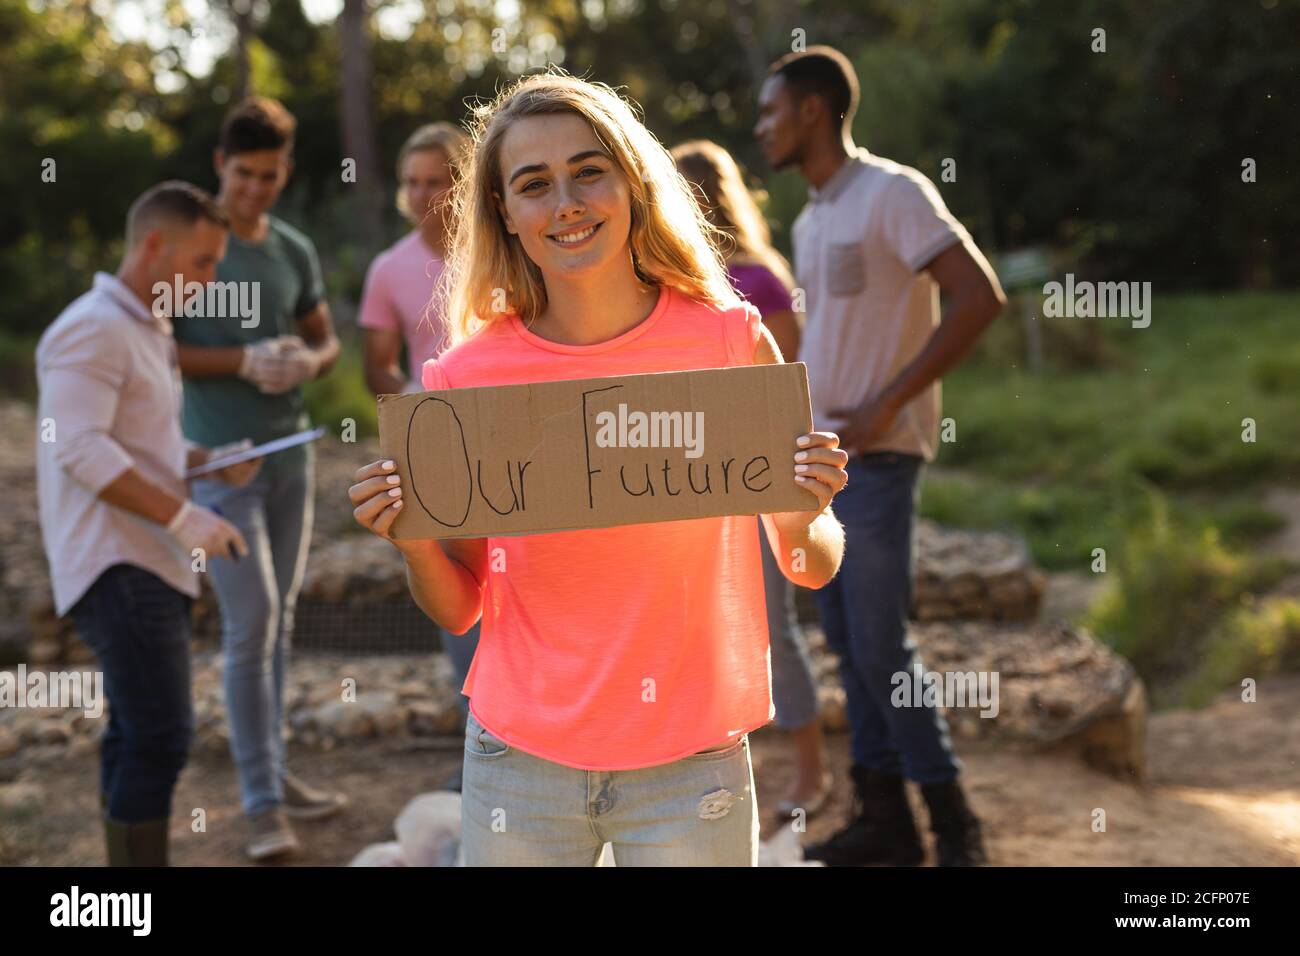 Volunteer cleaning up the countryside with board Our Future Stock Photo